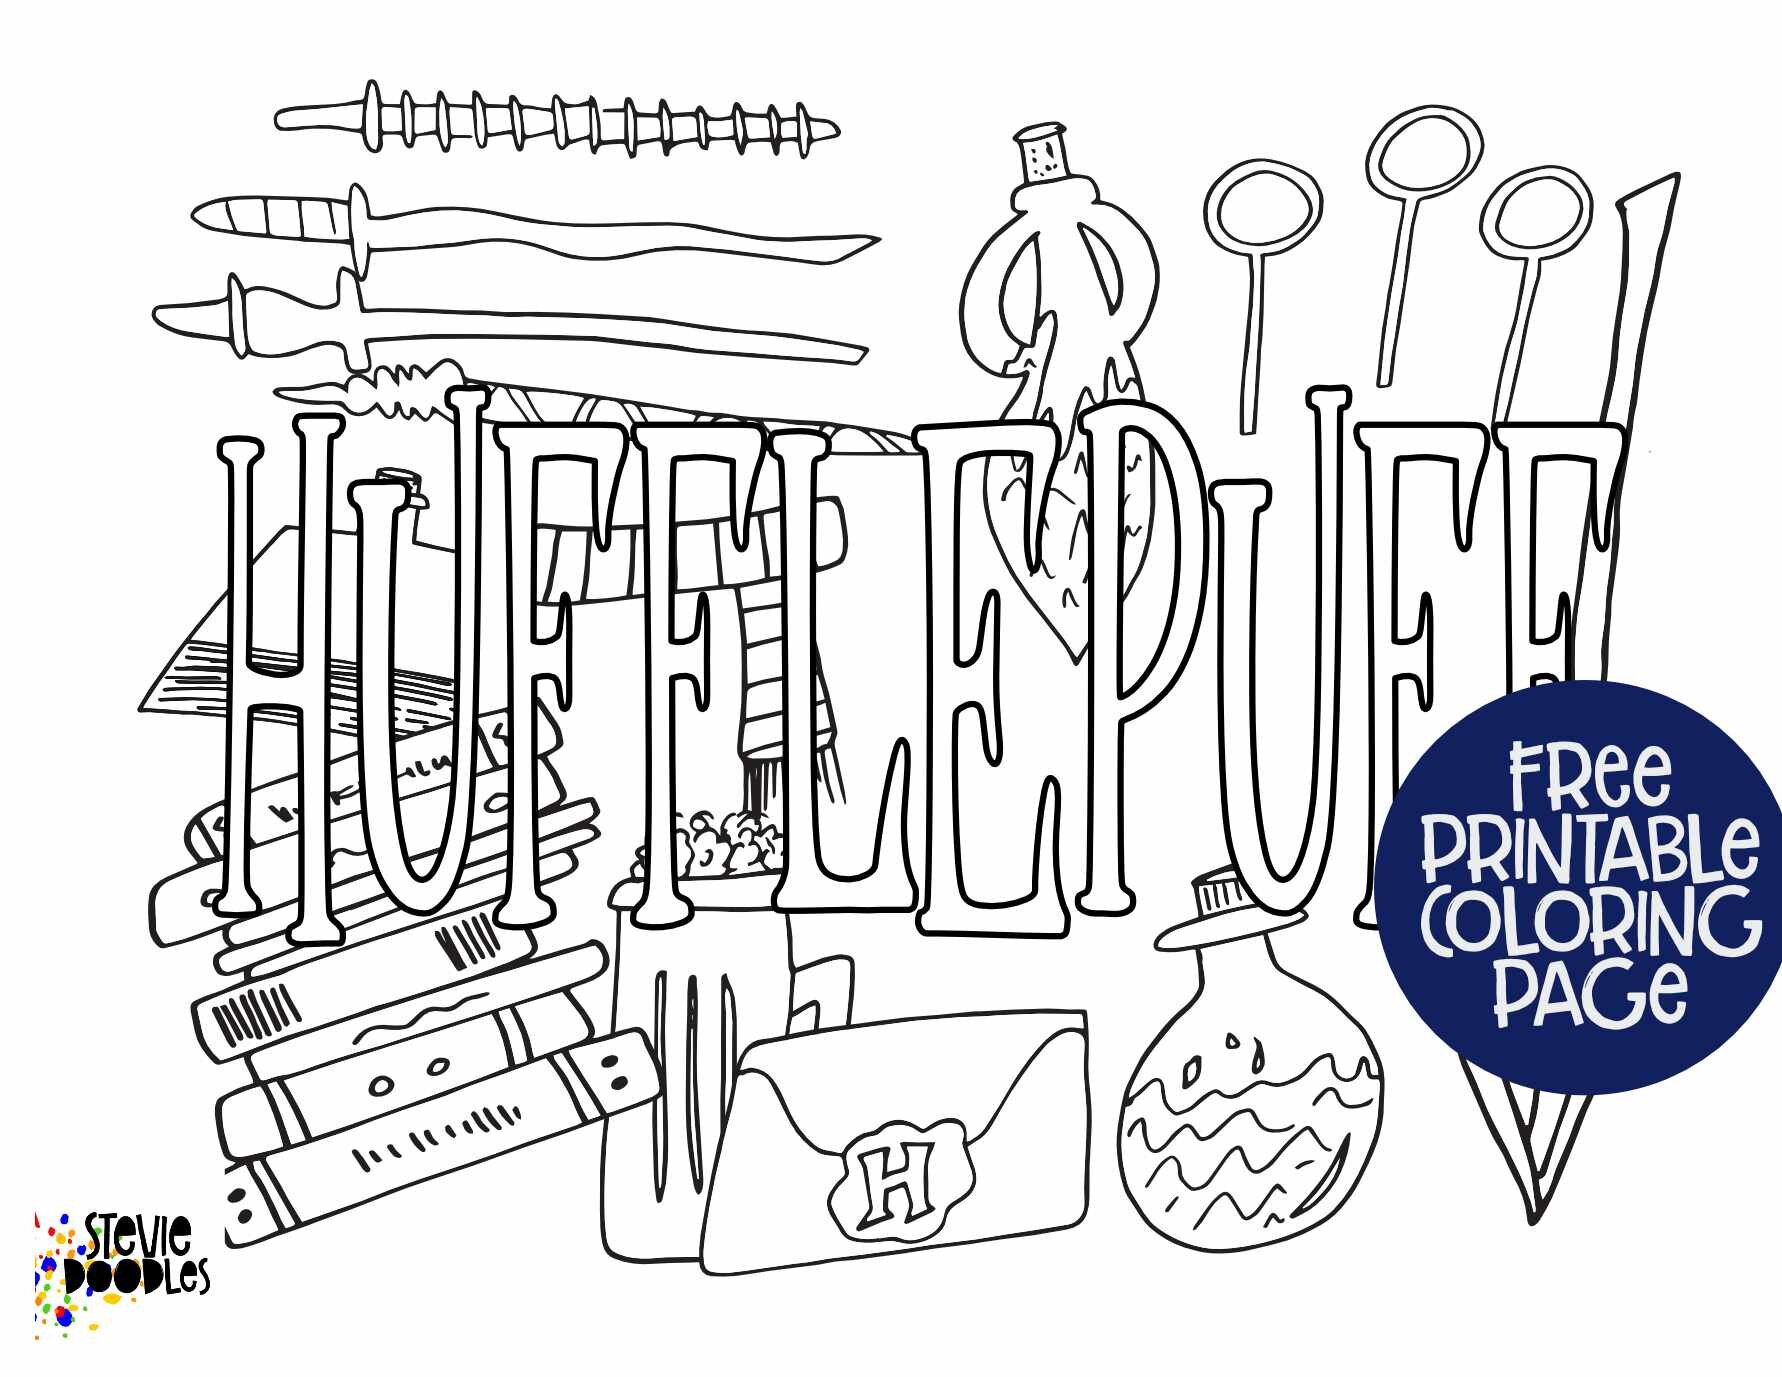 Free Hufflepuff Coloring Page - Harry Potter  Over 1000 free pages at Stevie Doodles